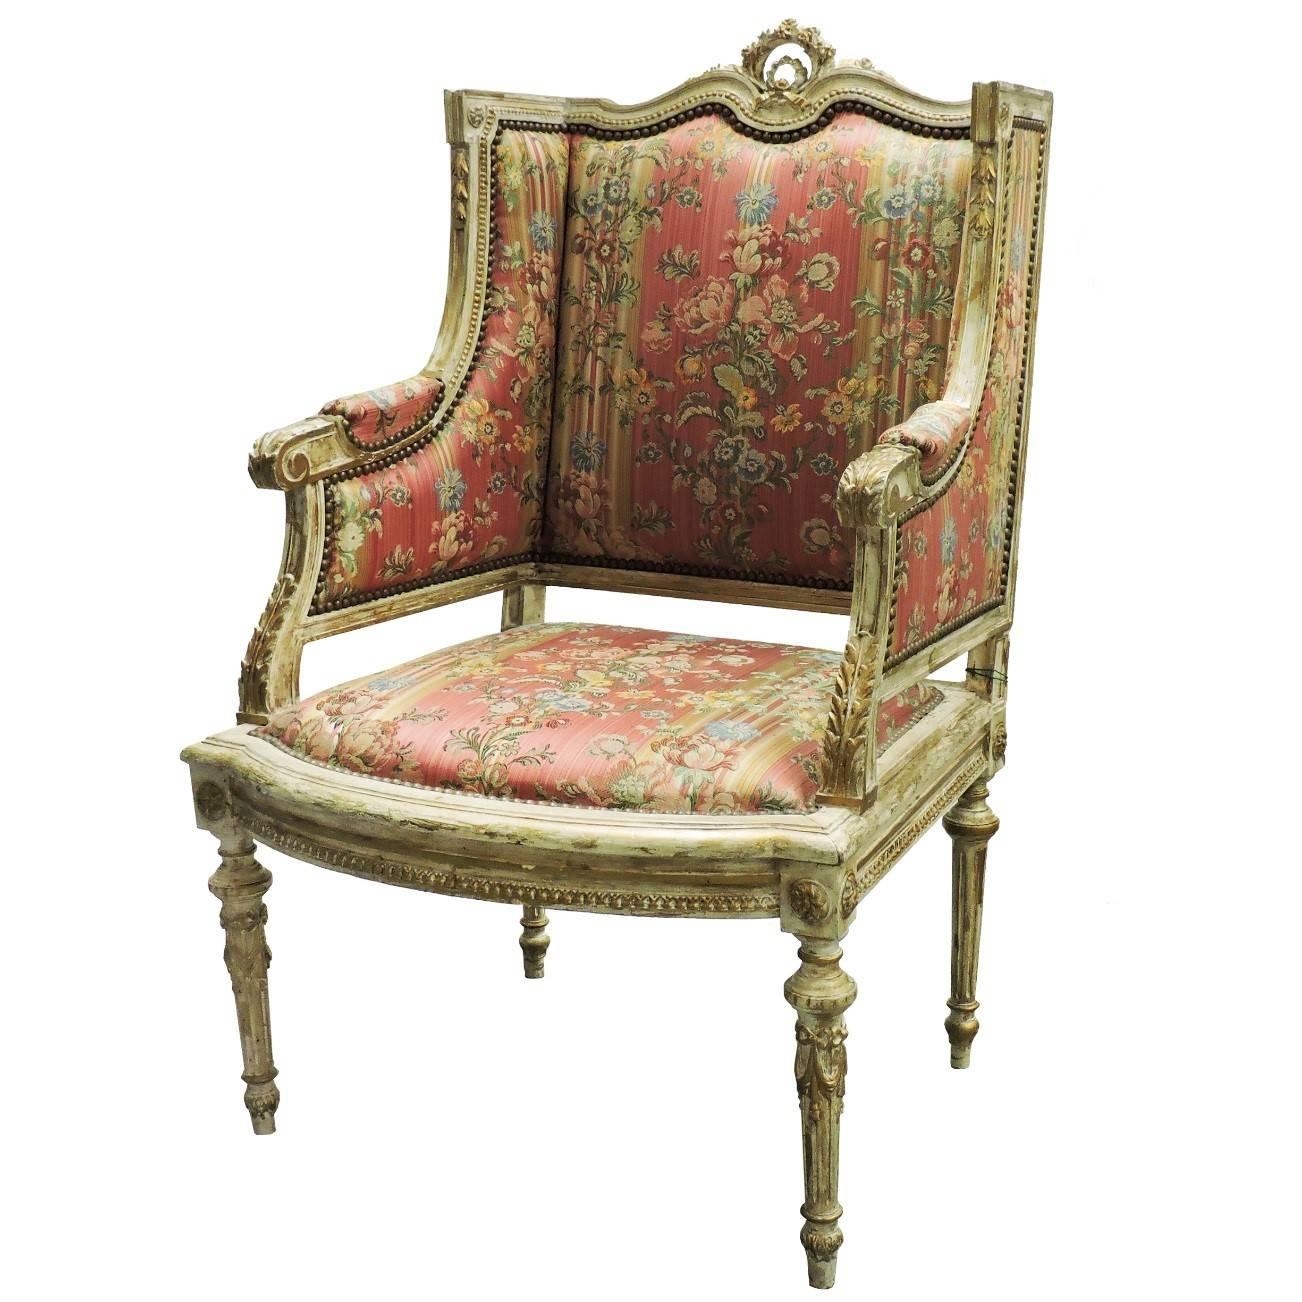 This beautiful Italian period piece was bought in Paris. This chair was originally entirely gilded, and now brushed with white finish over gilding. The original horse hair cushions remain intact, however upholstery has been redone in a Scalamandre